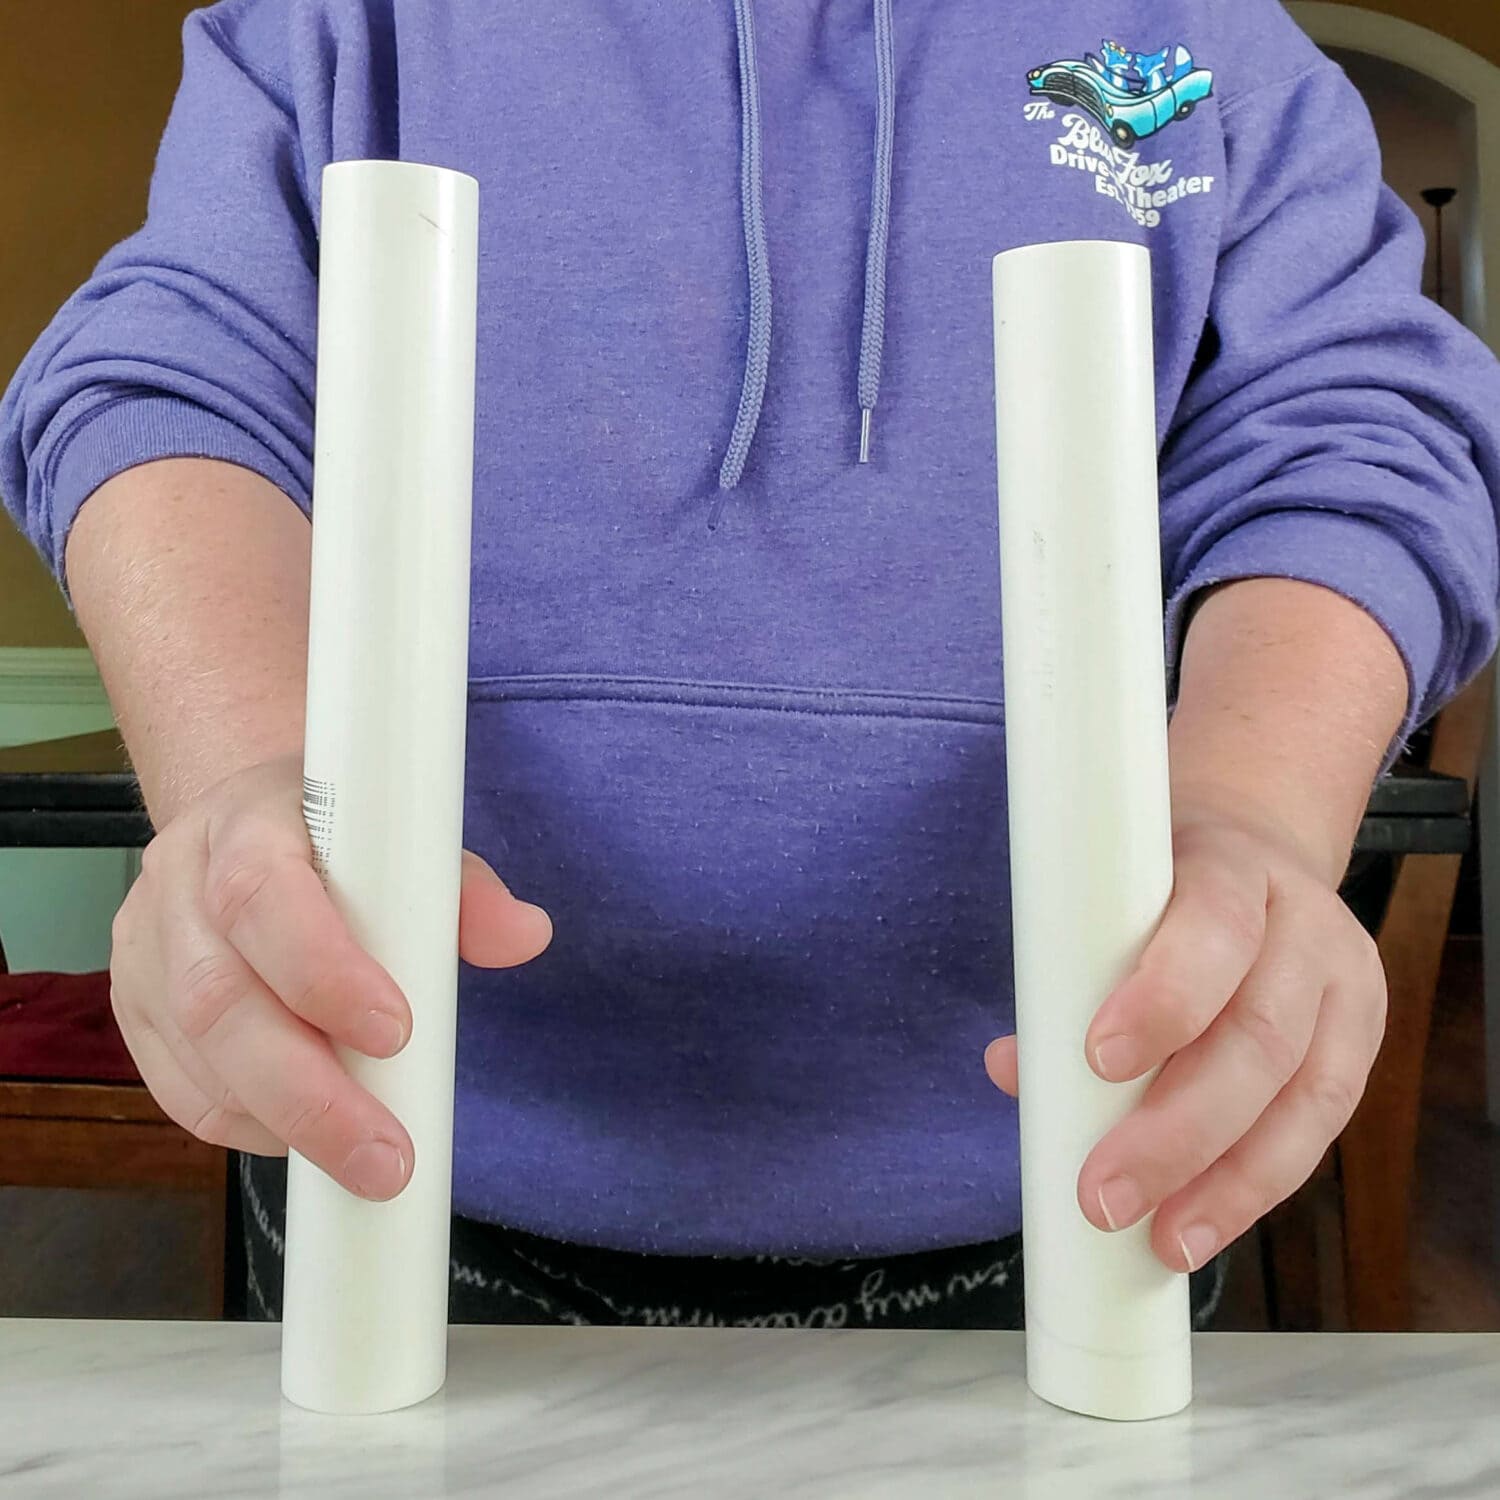 How to Make Maori Sticks (also called Lummi Sticks) a fun DIY instrument tutorial for making music come to life if your classroom or Primary Music room! Step by step tutorial and fun actions explained with helps from an LDS Primary Music Leader for Singing Time!